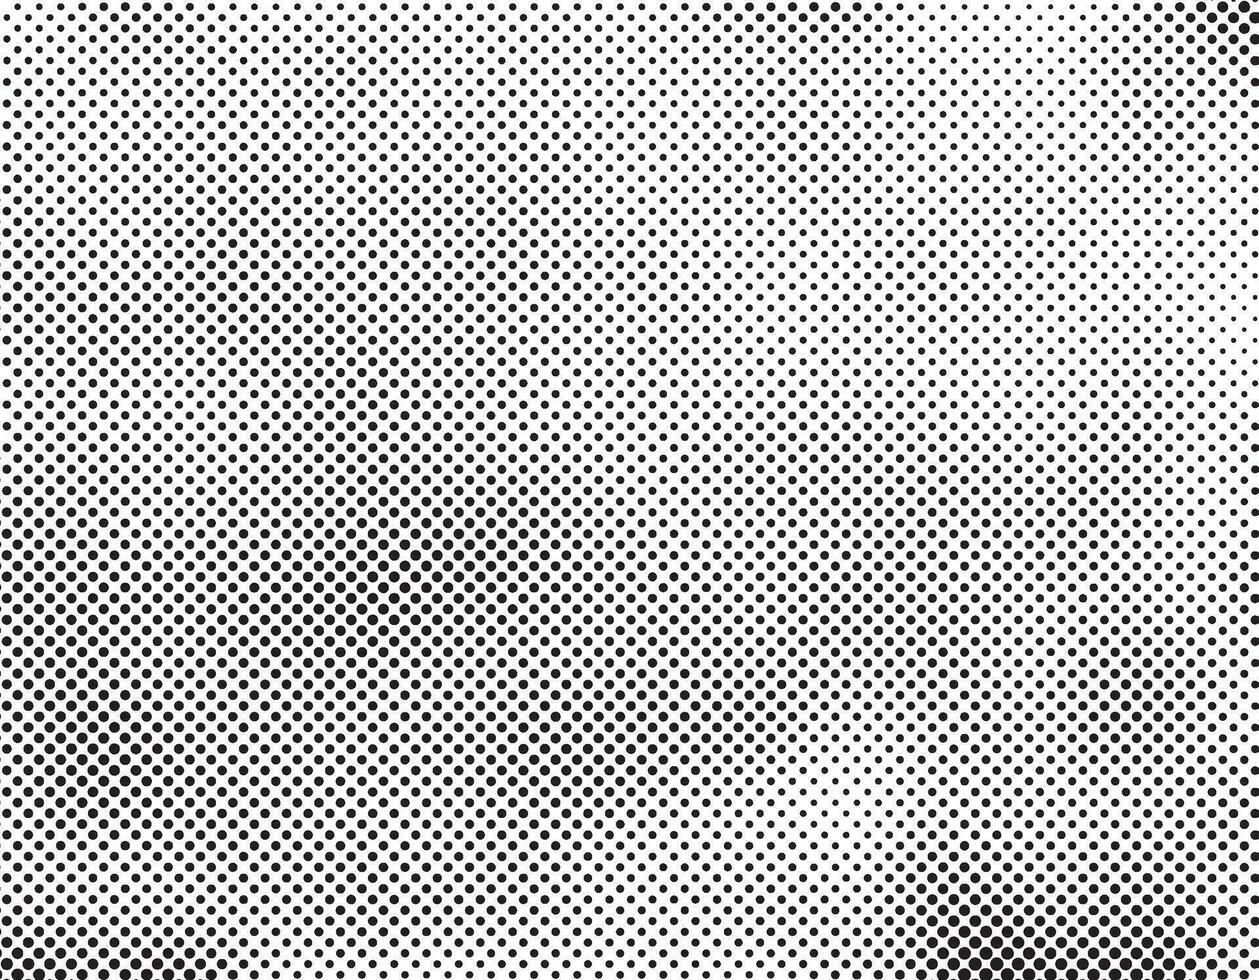 Abstract halftone dot backdrop in white and black tones in grunge style, monochrome background for business card, poster, interior design, sticker, website, advertising vector